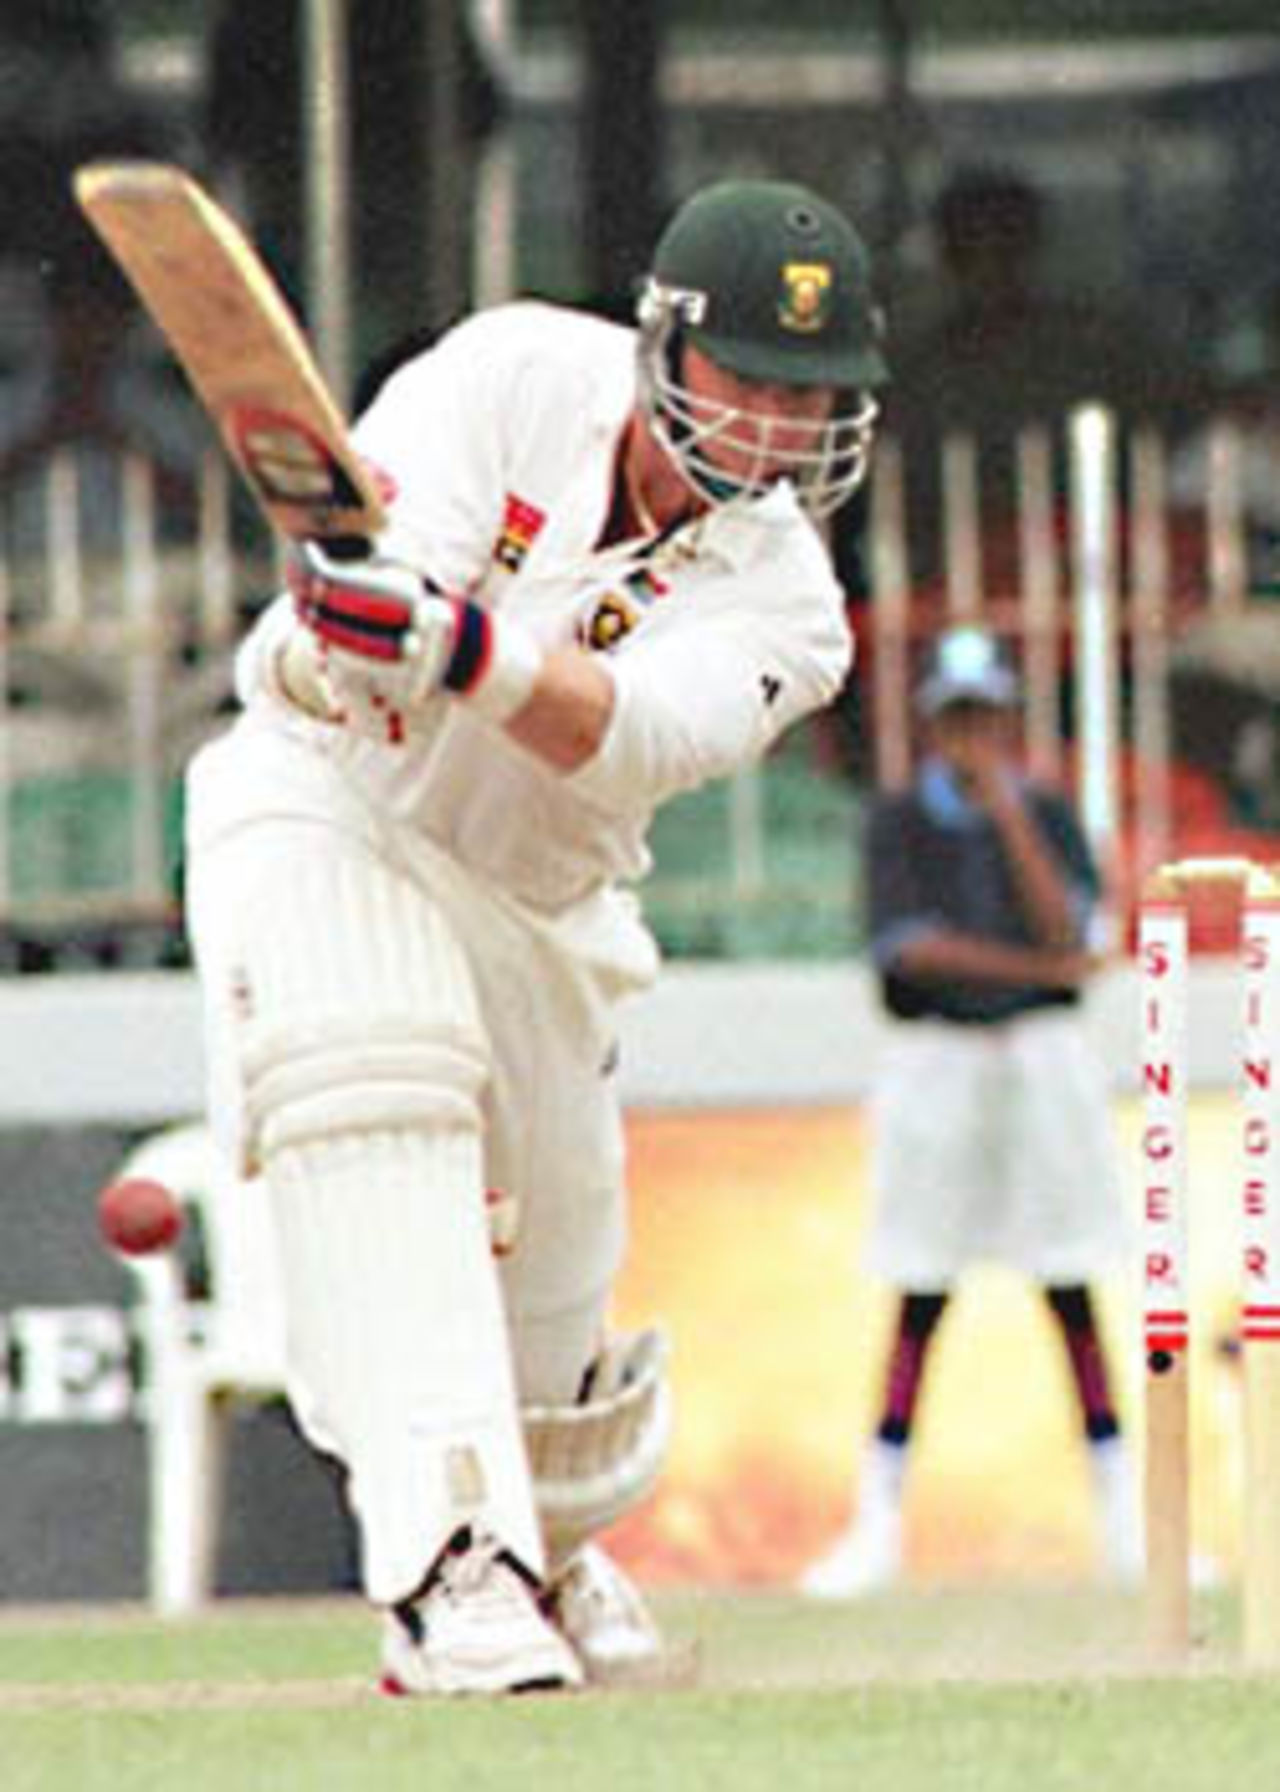 Klusener drives the ball back past the bowler, South Africa in Sri Lanka, 2000/01, 3rd Test, Sri Lanka v South Africa, Sinhalese Sports Club Ground, Colombo, 06-10 August 2000 (Day 4).